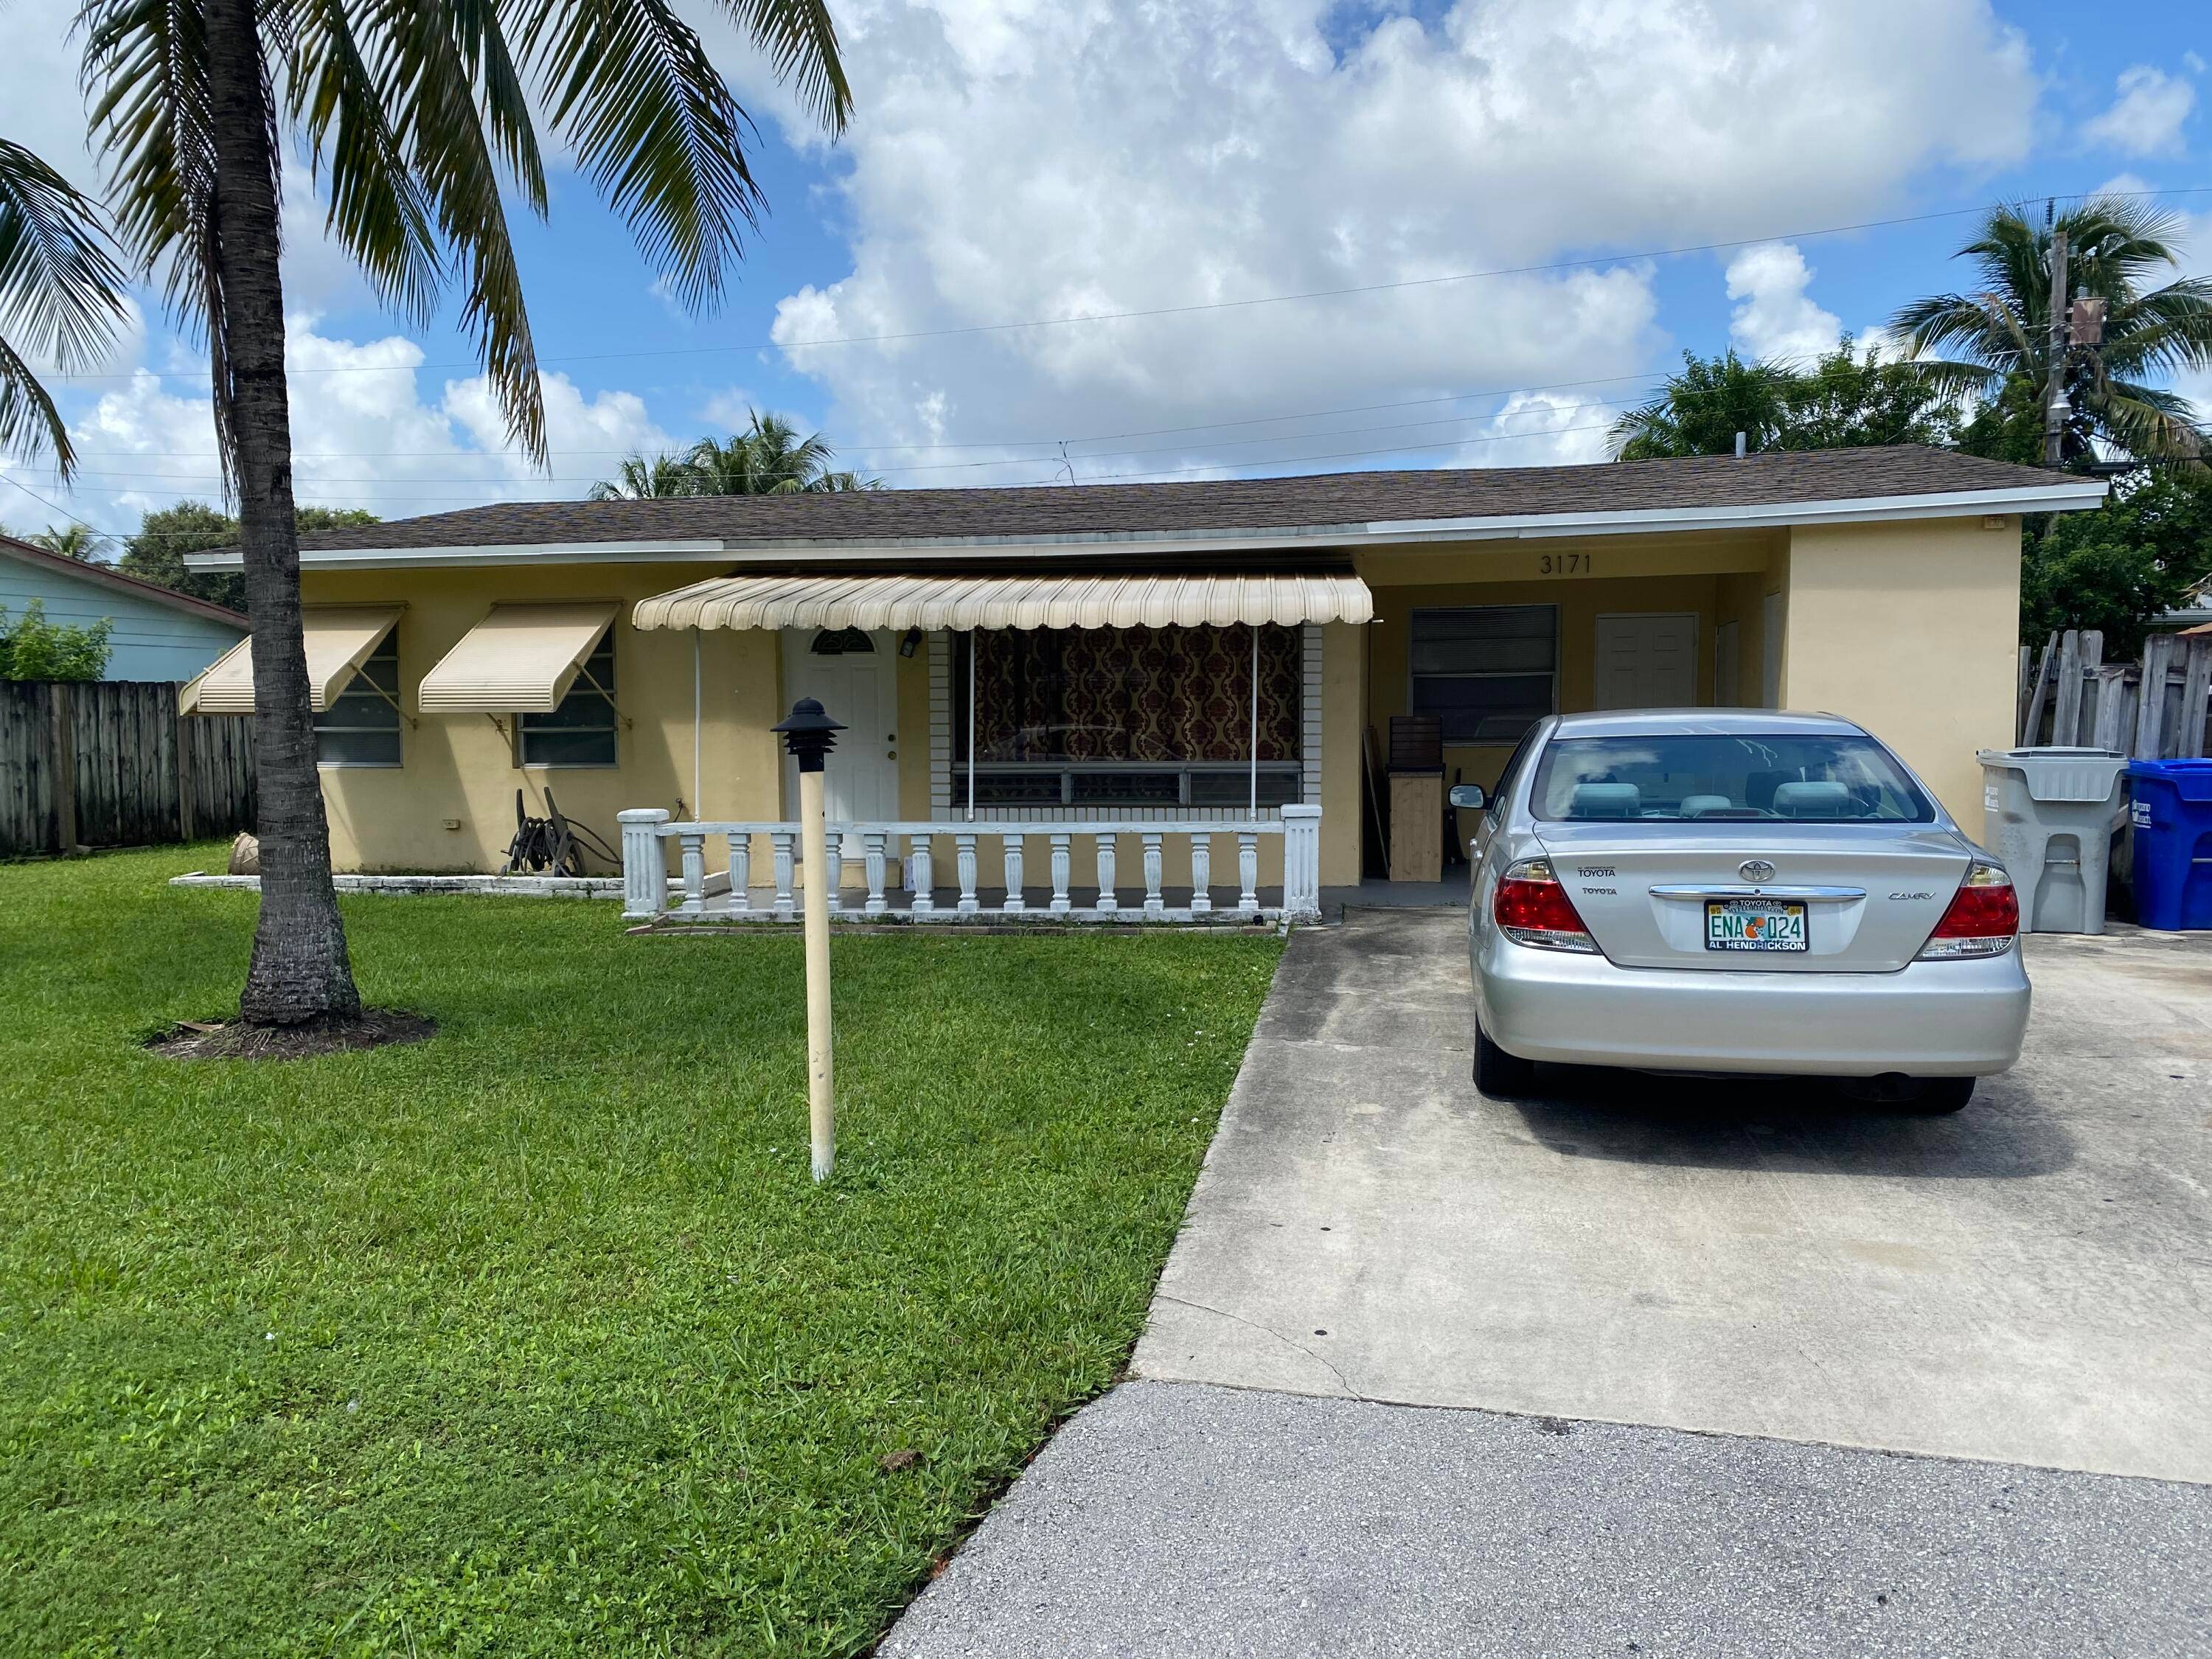 Well Maintained Home in the Desirable Neighborhood of Cresthaven, located in the HUB of Pompano Beach !